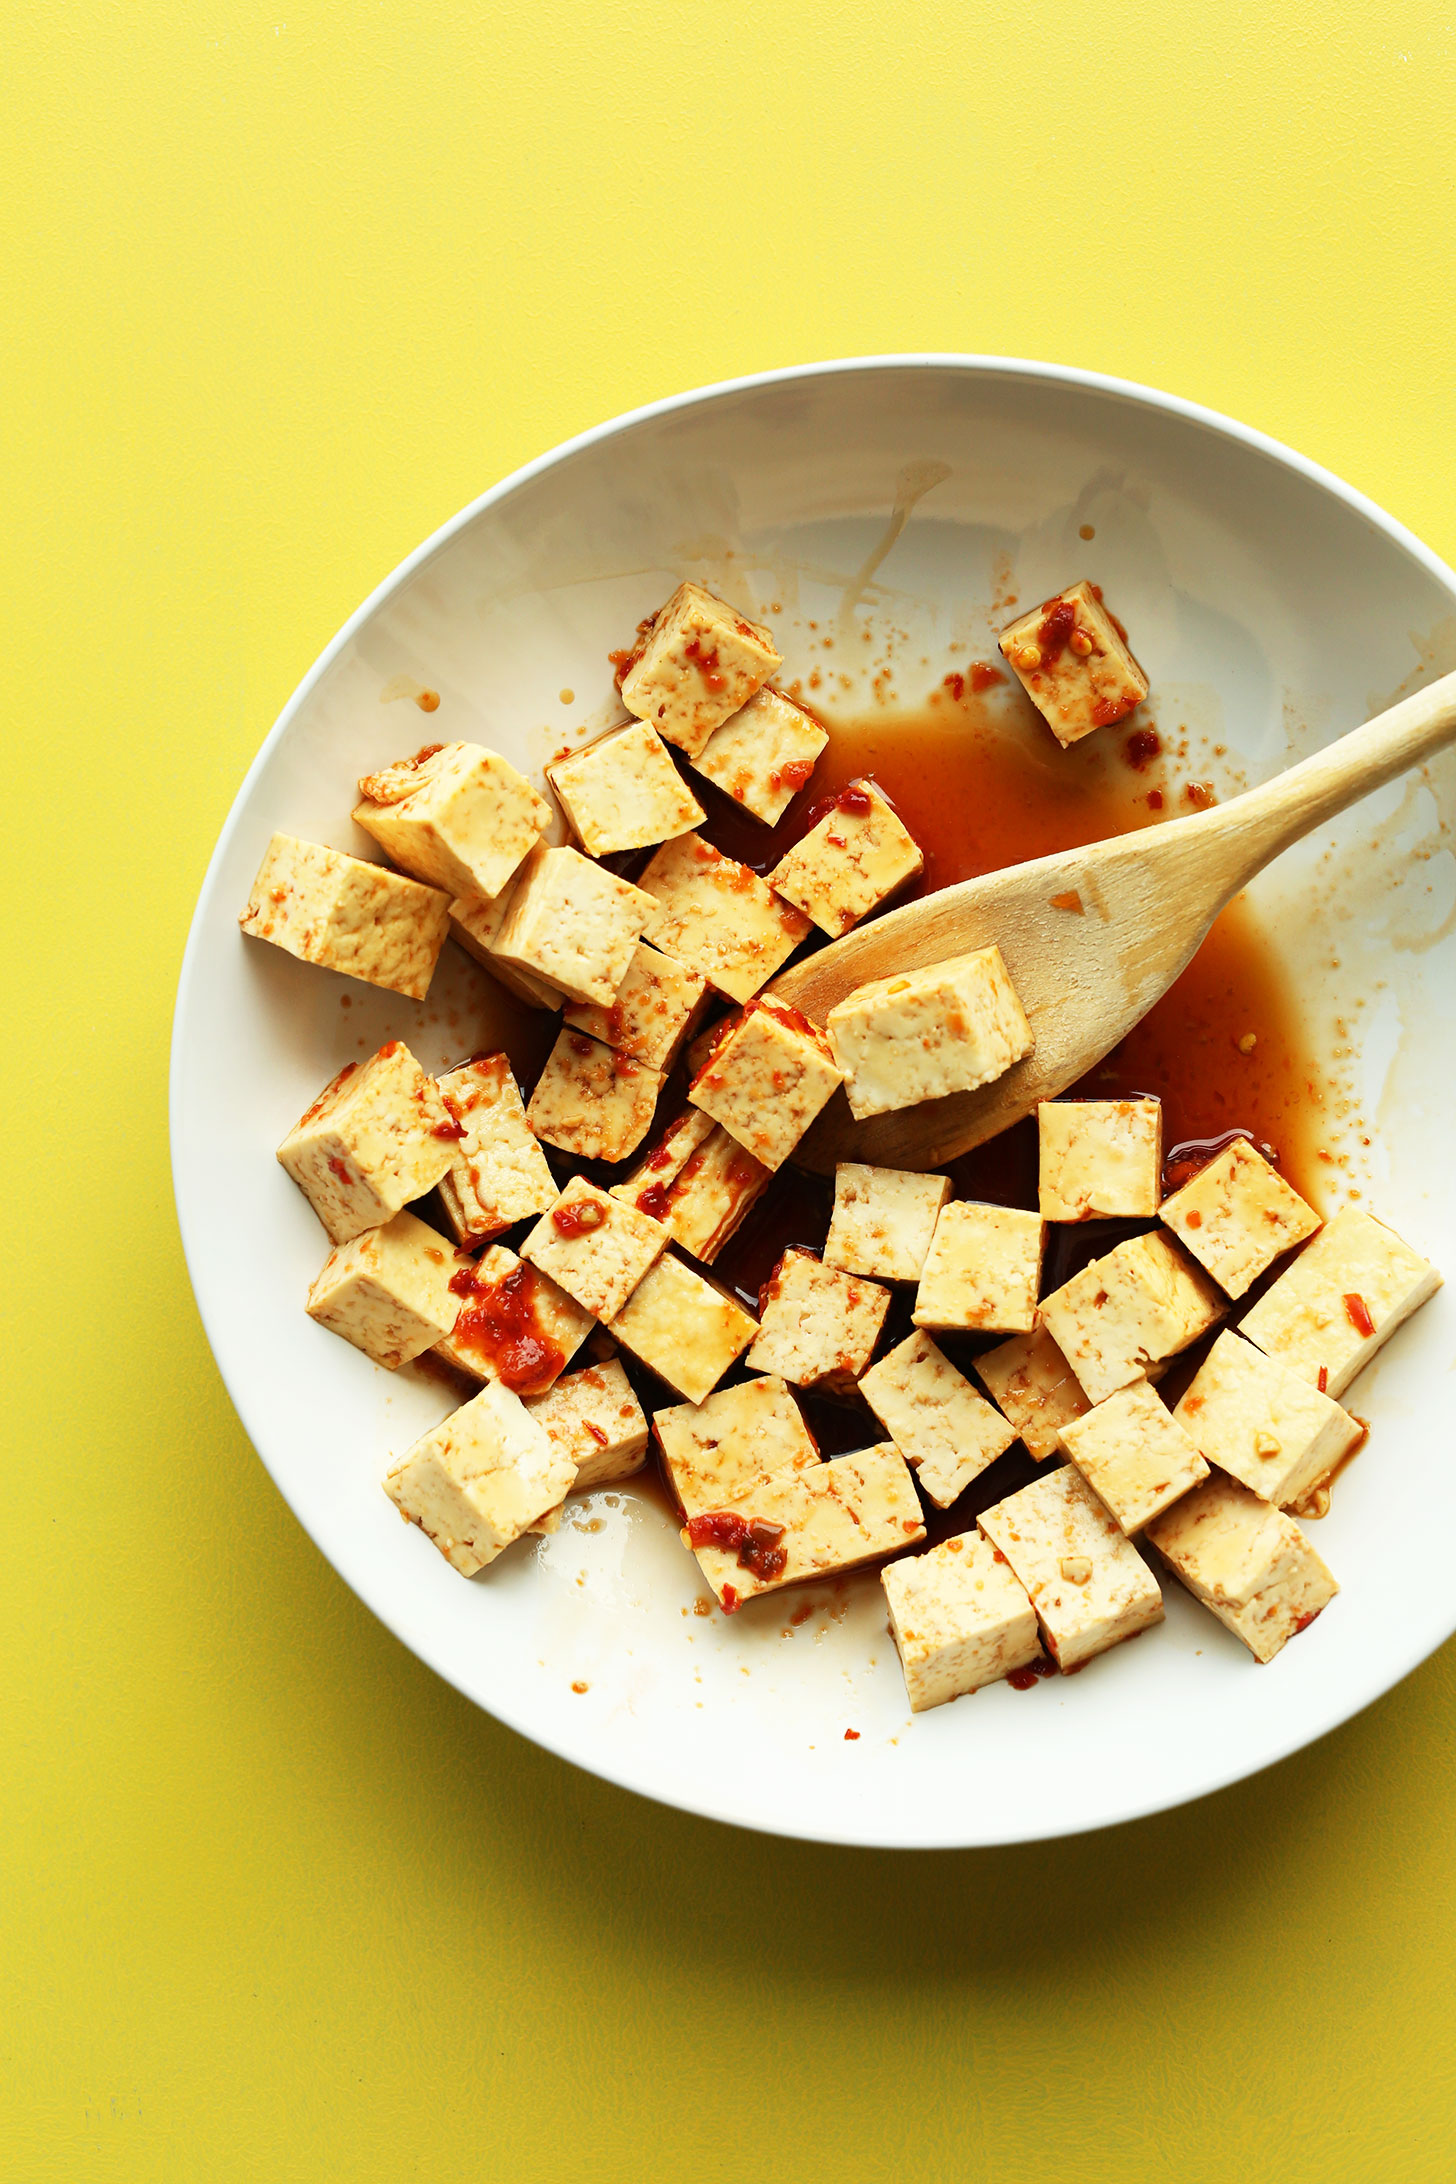 Marinating cubes of tofu in gluten-free vegan sweet and spicy sauce